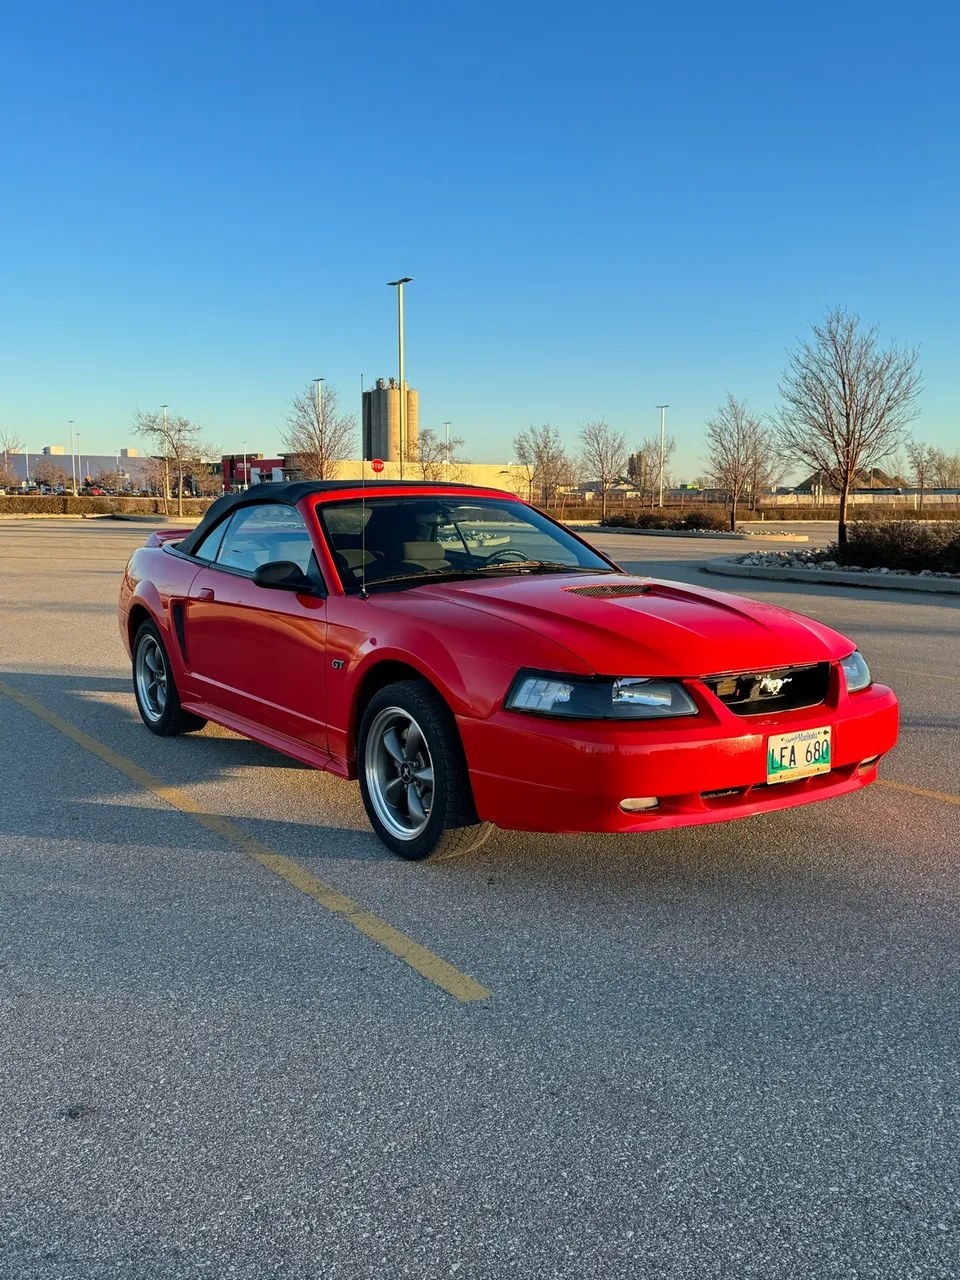 2000 Ford Mustang GT Convertible Safetied